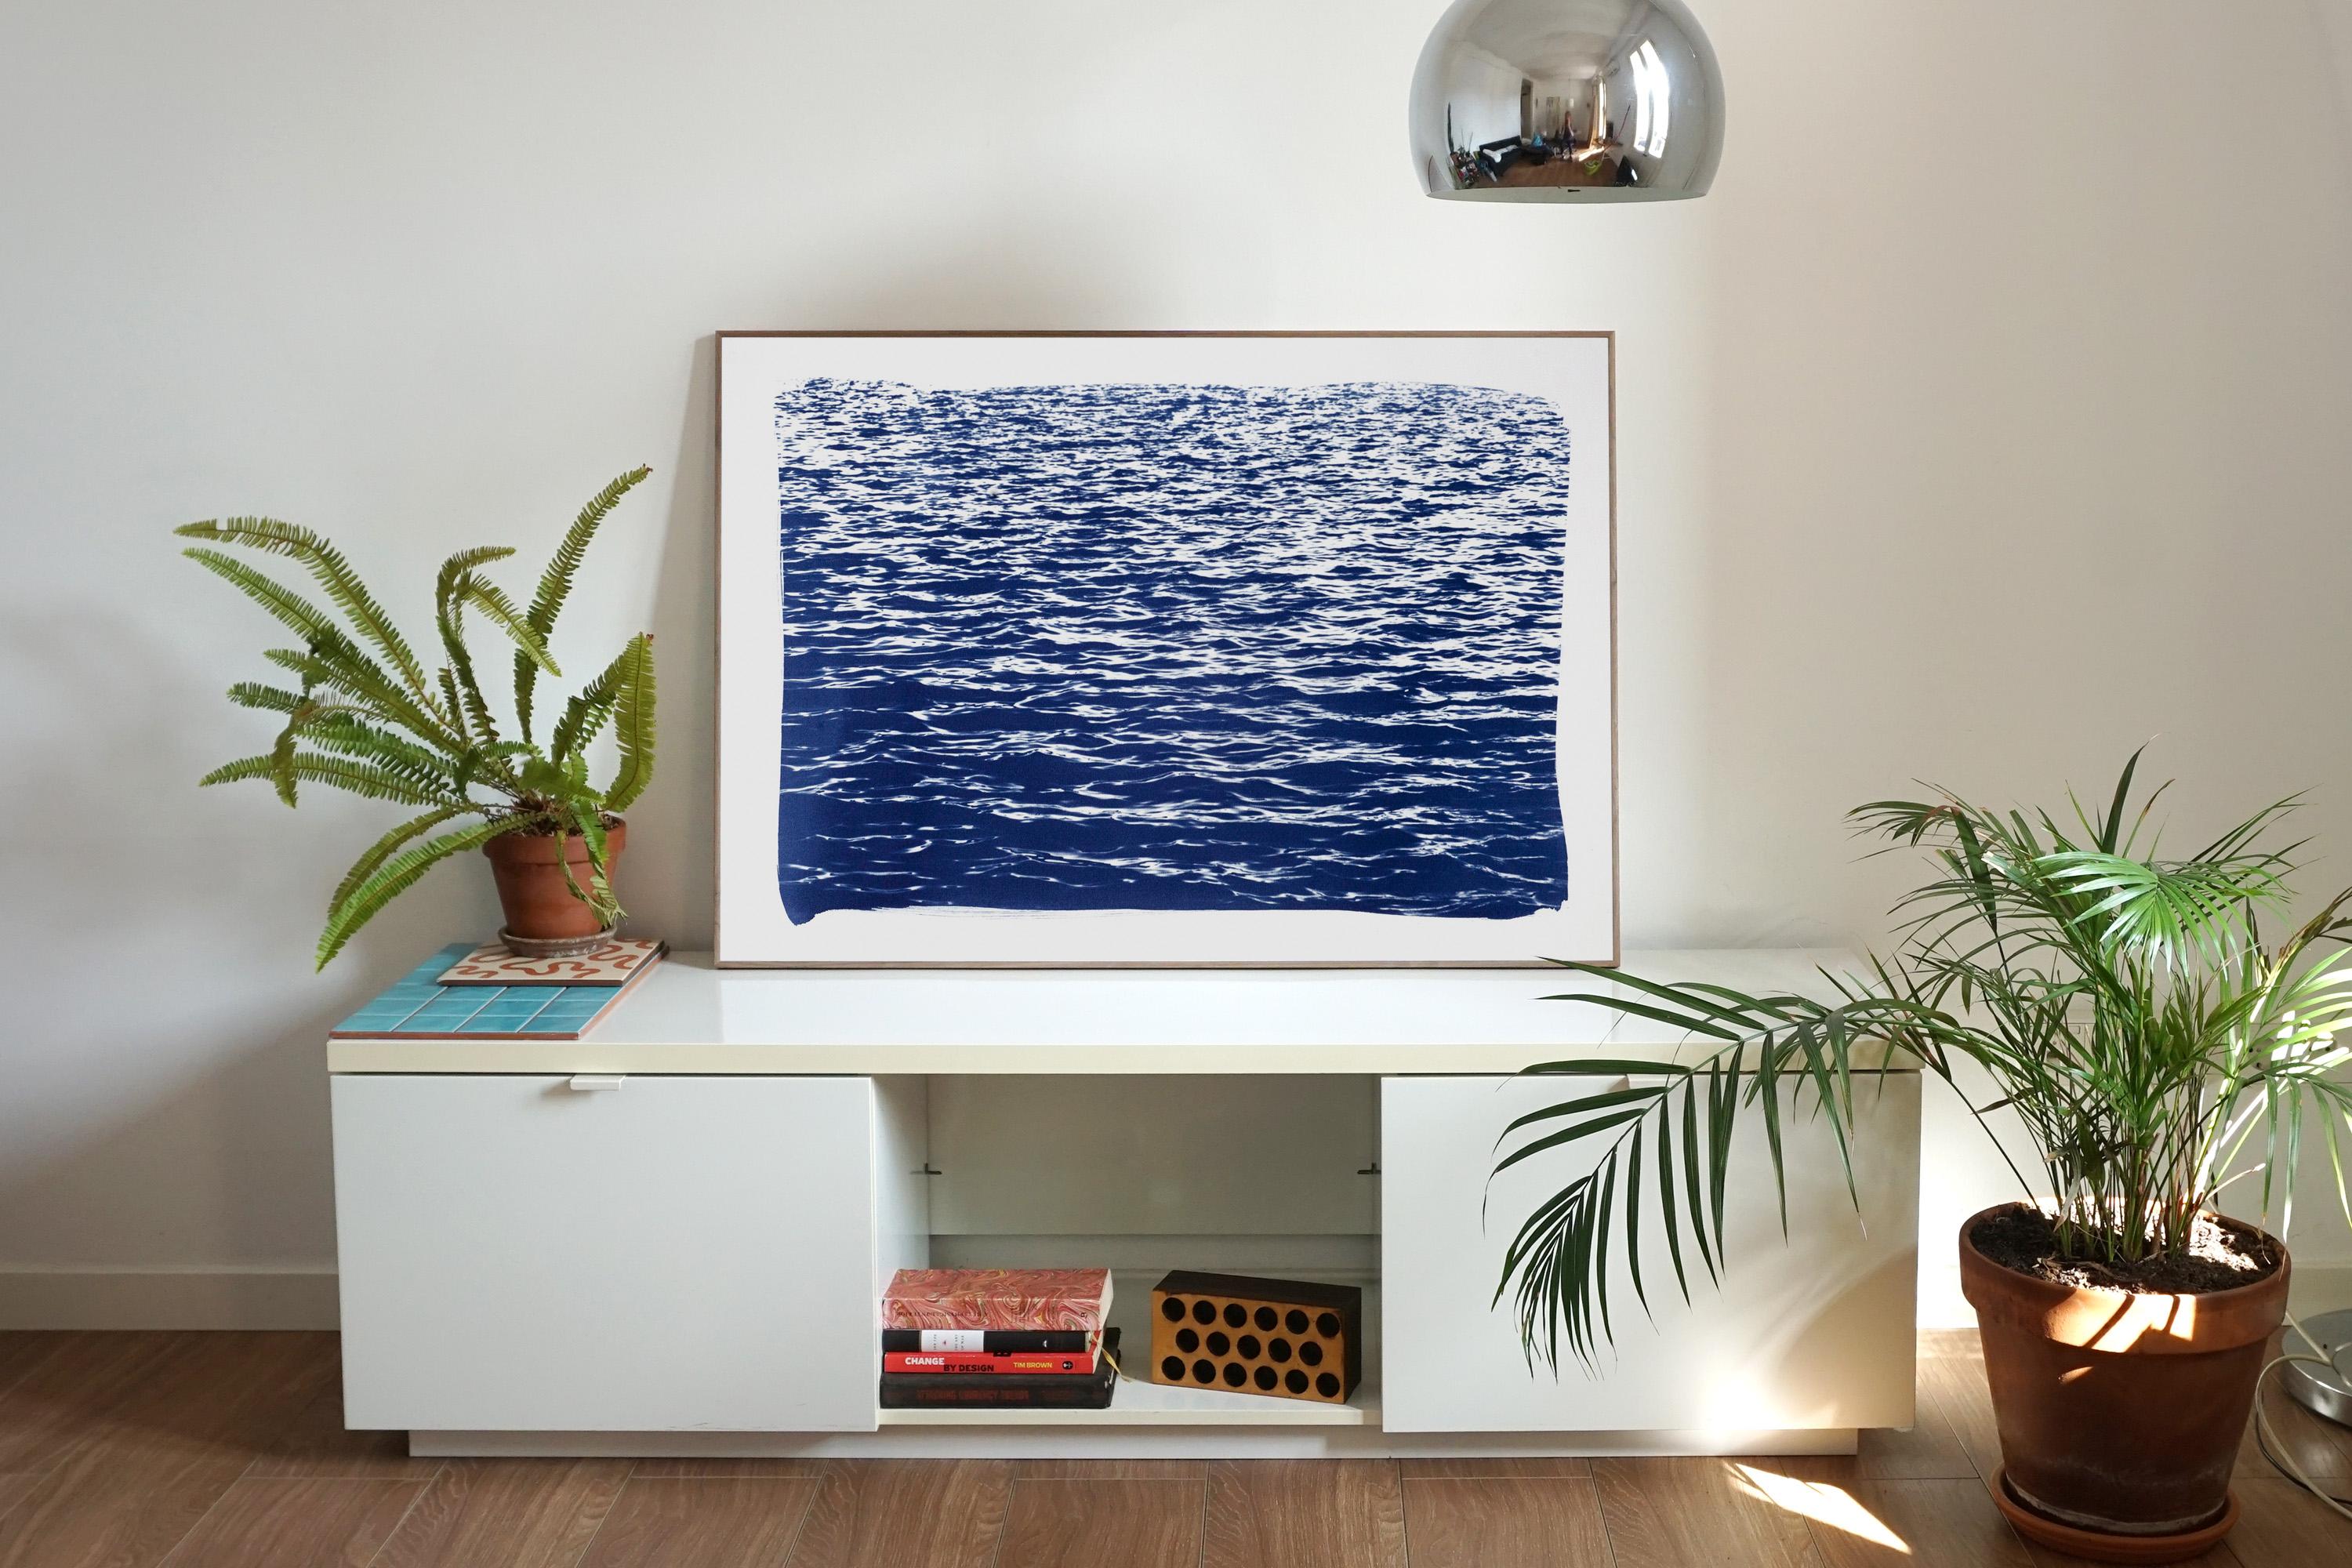 Mediterranean Seascape Cyanotype, Nautical Print of Sea Waves in Blue, Feng Shui - Photograph by Kind of Cyan